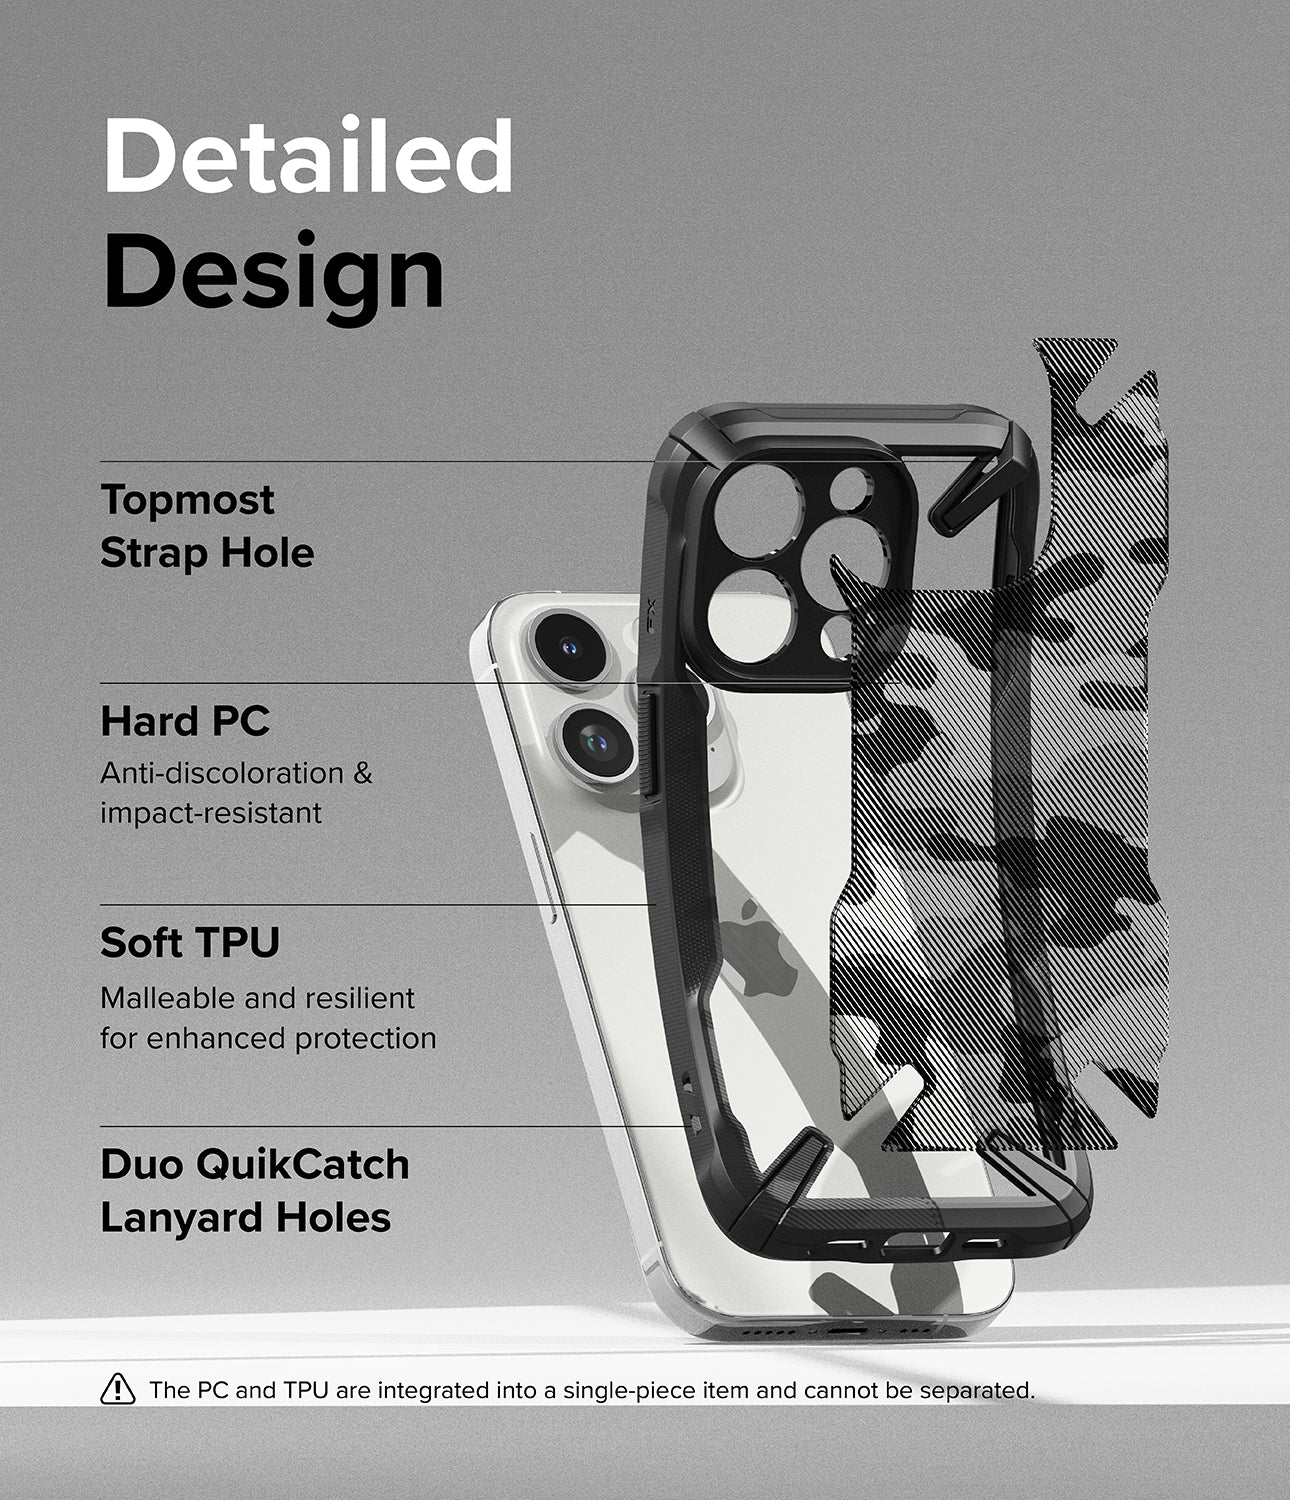 iPhone 15 Pro Case | Fusion-X - Camo Black- Detailed Design. Topmost Strap Hole. Anti-discoloration and impact-resistant Hard PC. Malleable and resilient for enhanced protection with Soft TPU. Duo QuikCatch Lanyard Holes.